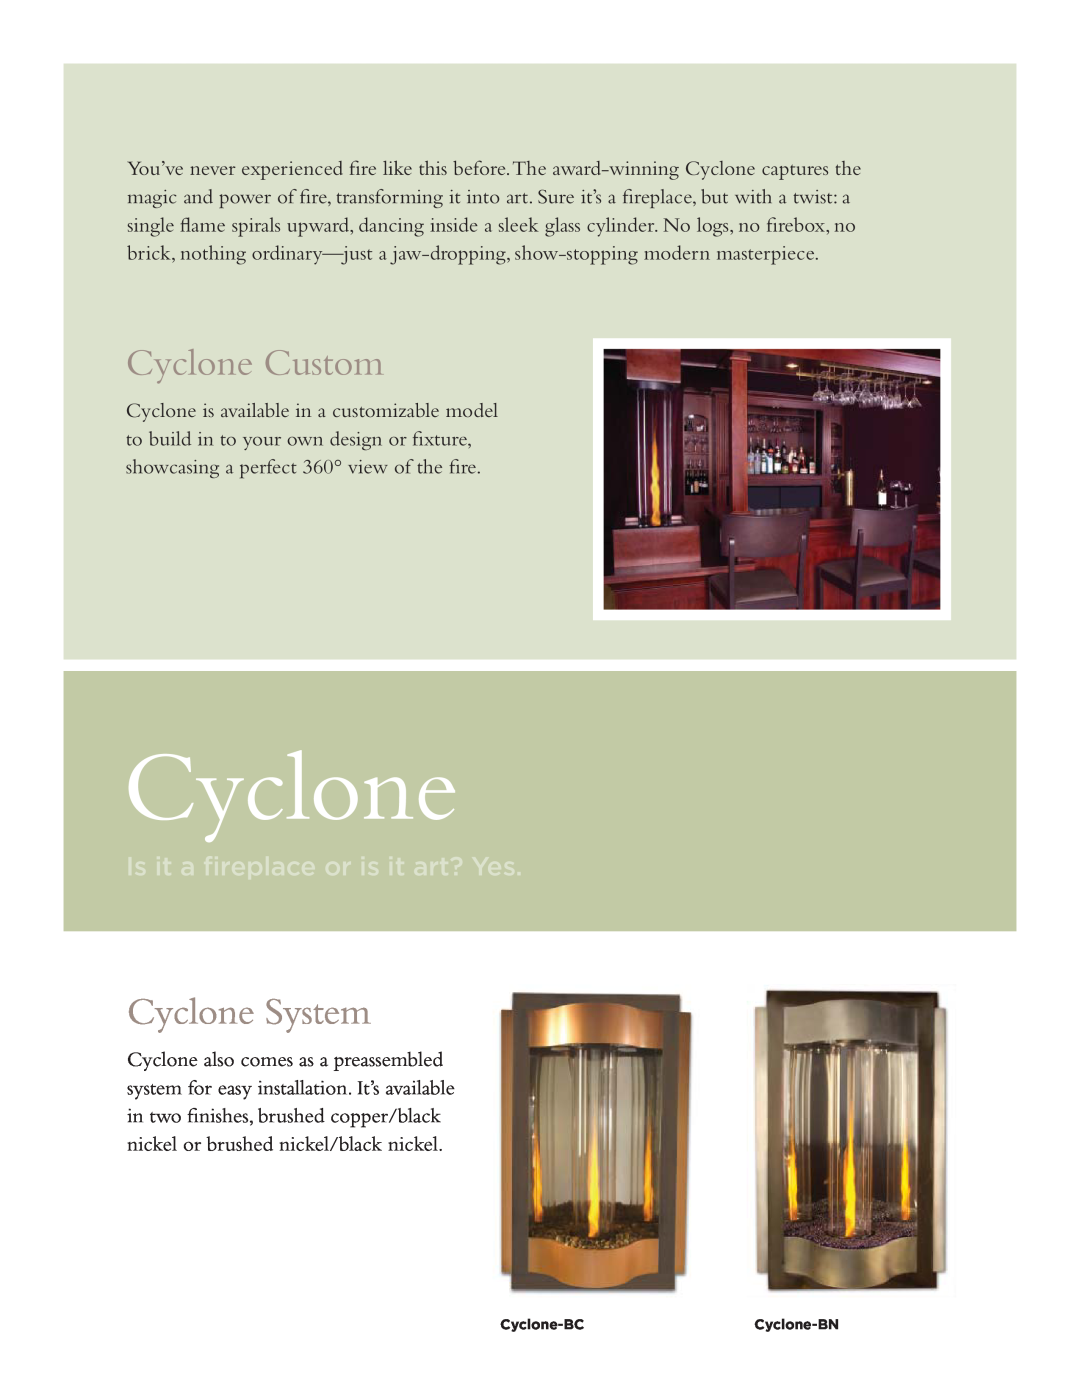 Hearth and Home Technologies Gas Fireplaces manual Cyclone Custom, Cyclone System, Is it a fireplace or is it art? Yes 